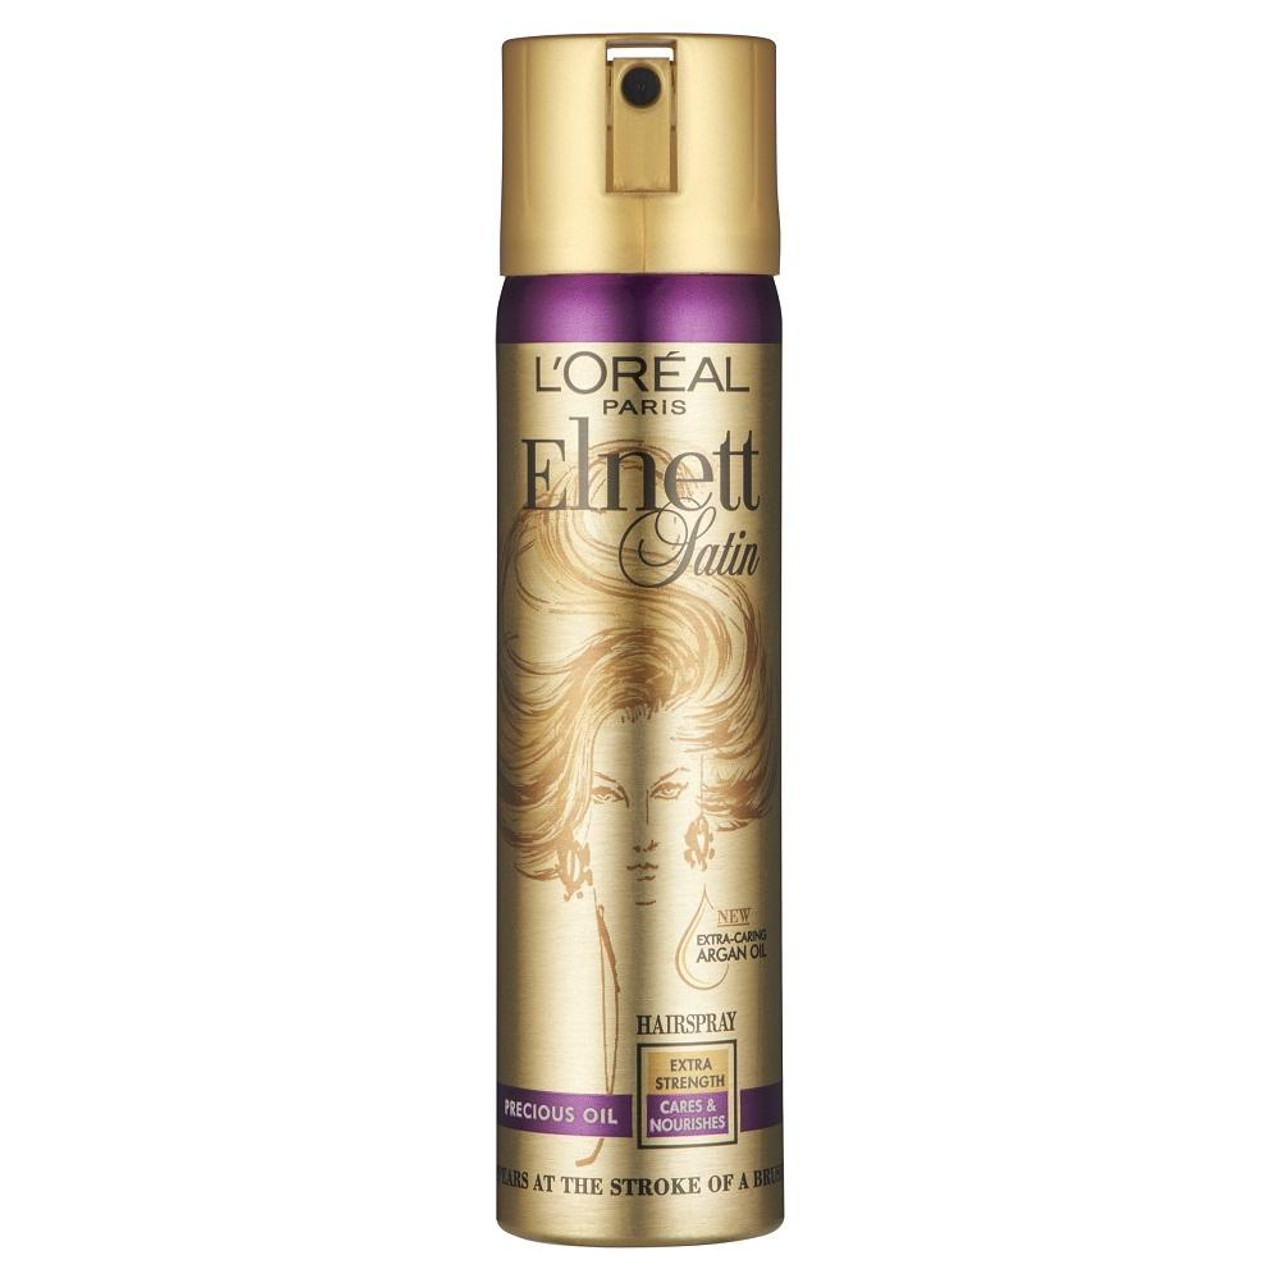 L'Oreal Paris Elnett Satin Extra Strong Hold Hairspray - Volume 11 Ounce (1  Count) (Packaging May Vary)